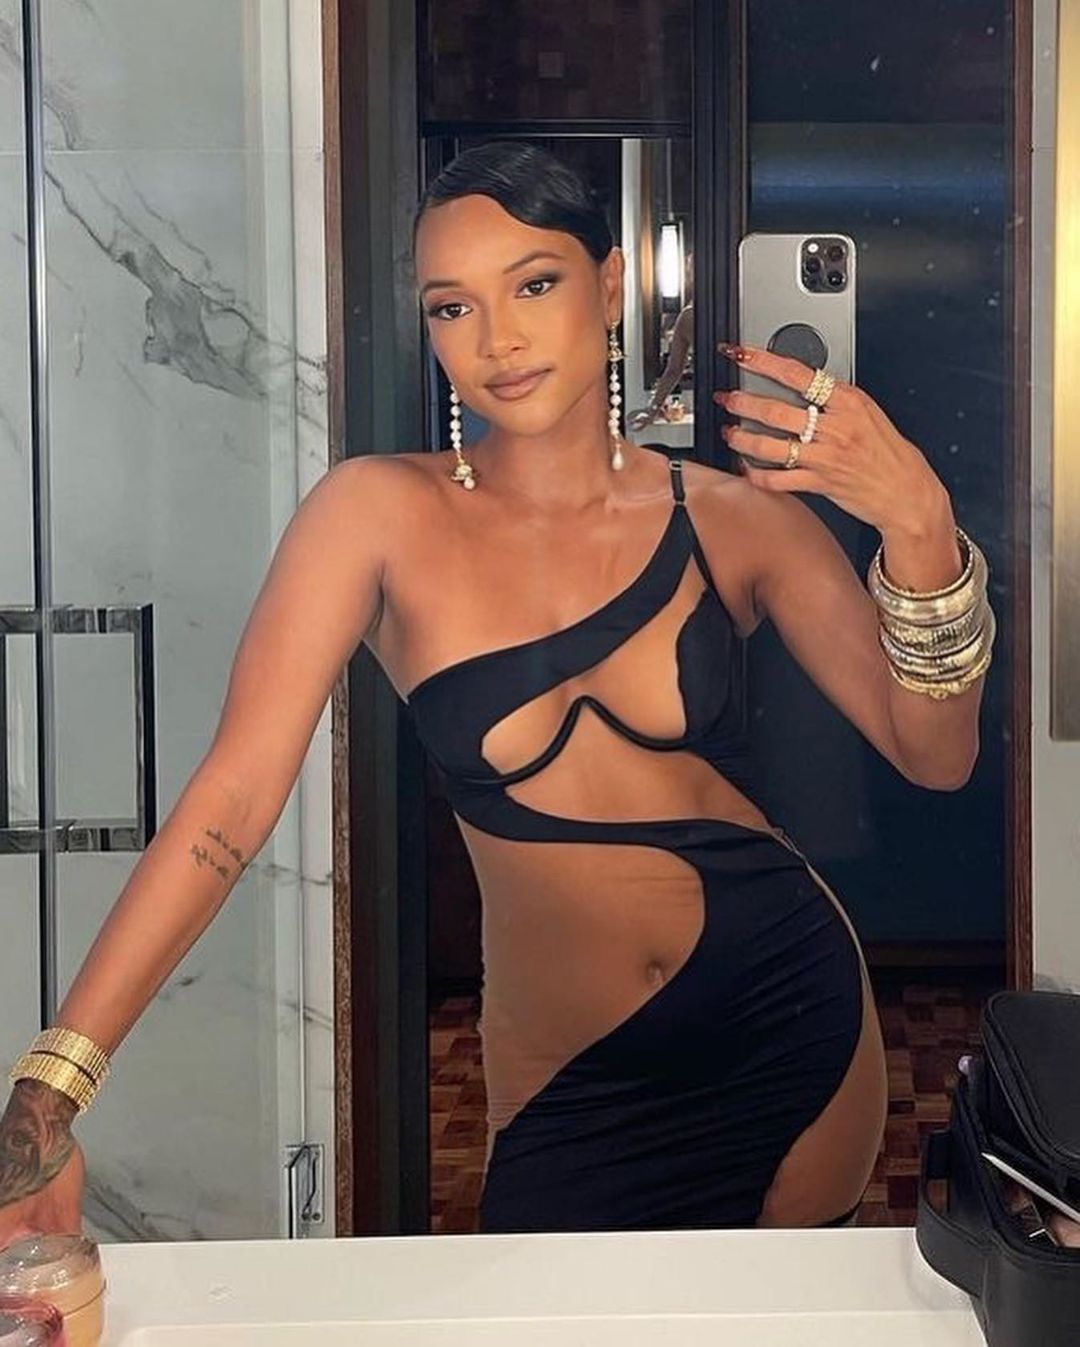 tape Quickly pavement 5 Times Celebrities Have Worn God Save Queens Black Cut-Out Pieces,  Featuring Karrueche, Jelena Karleusa, Laura Govan and More!